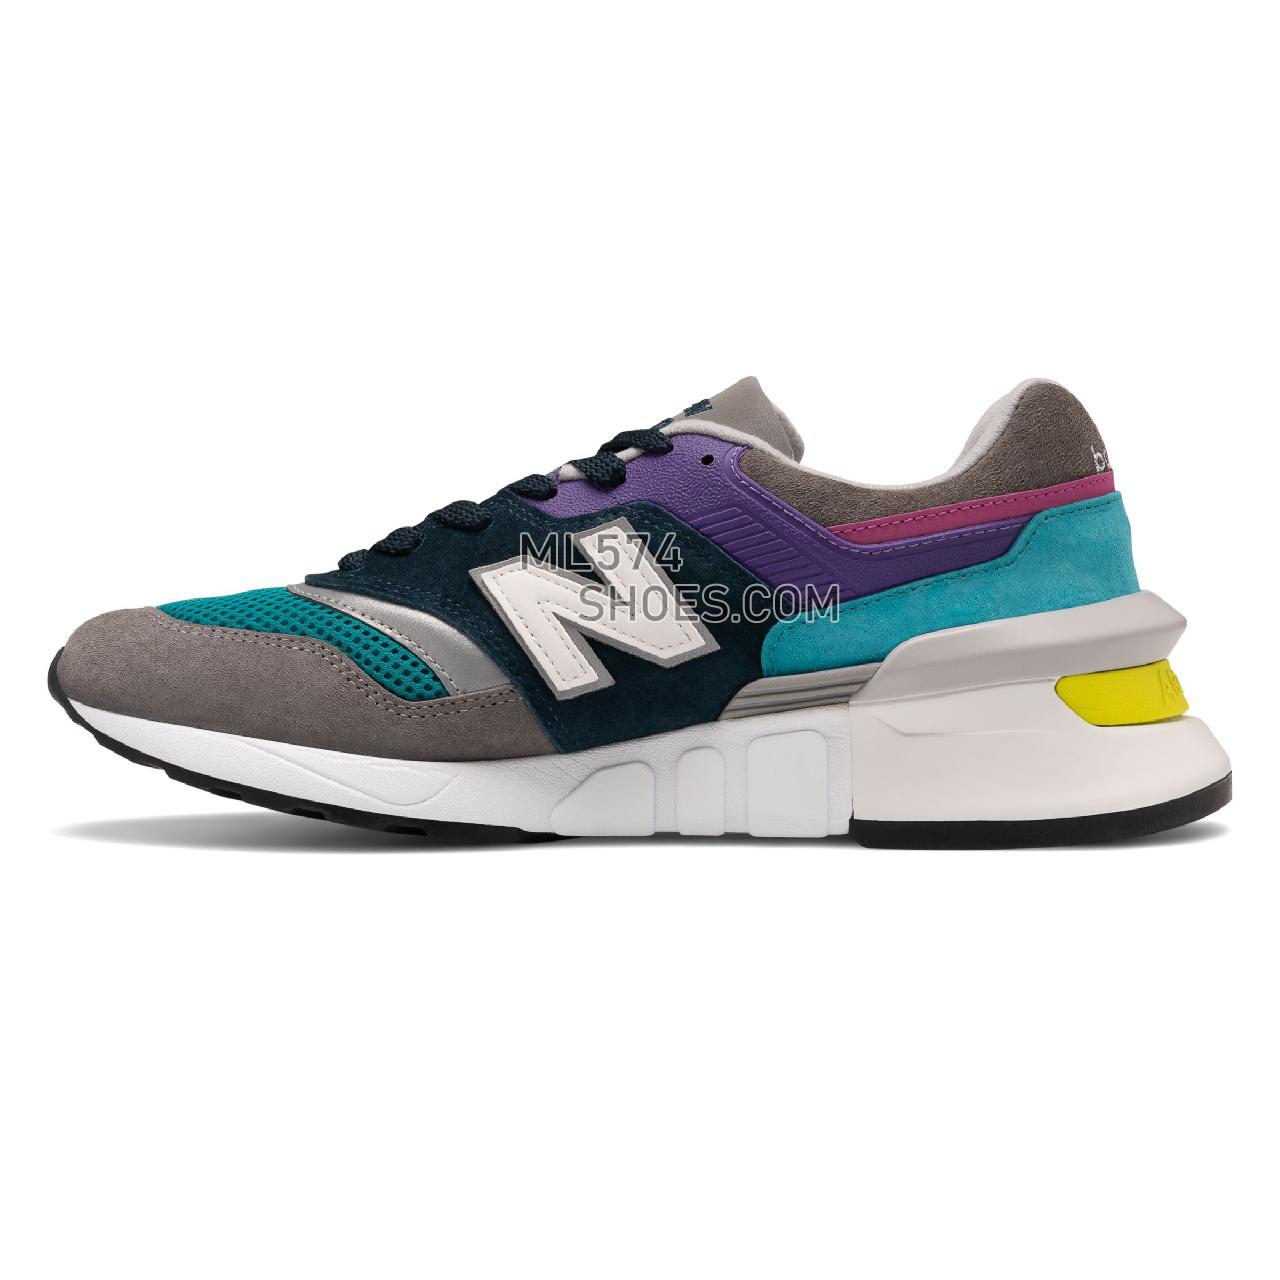 New Balance 997S - Men's 997S Classic - Grey with Blue - M997SMG